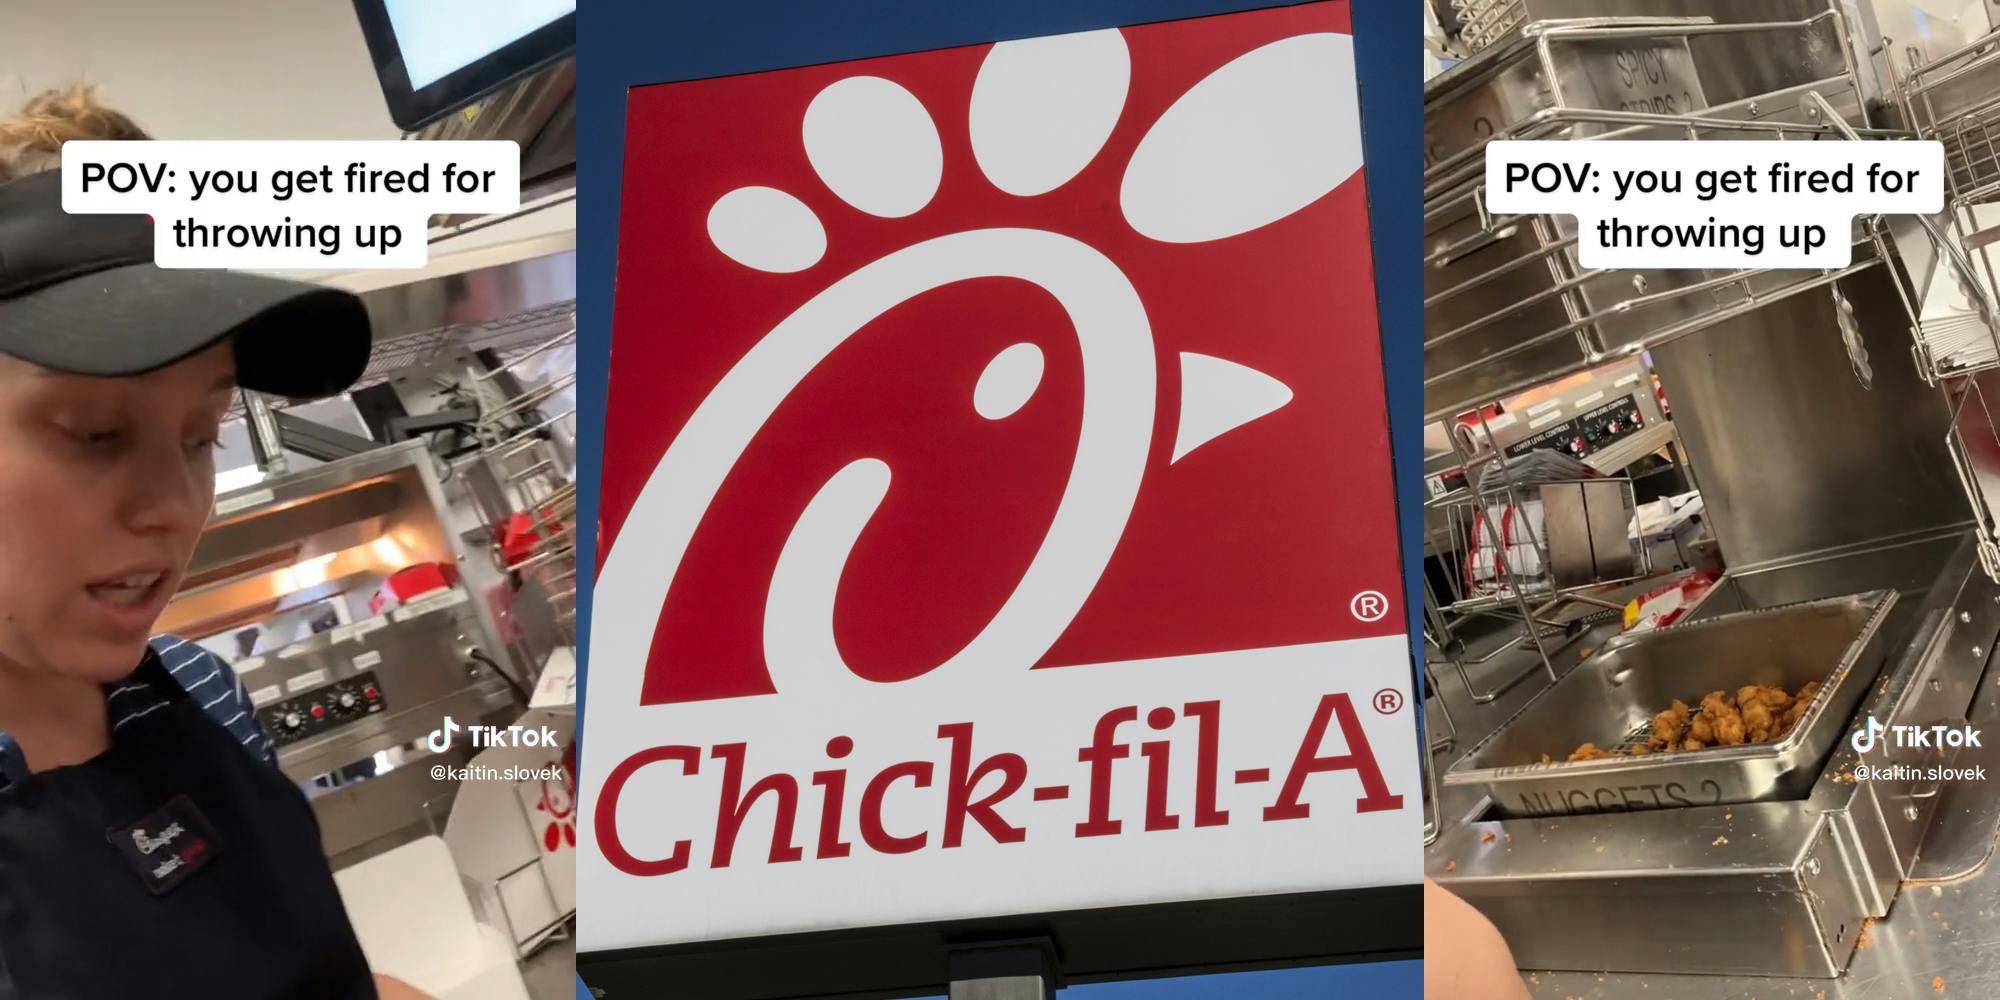 Chick-fil-A Worker Says They Were Fired for Throwing Up